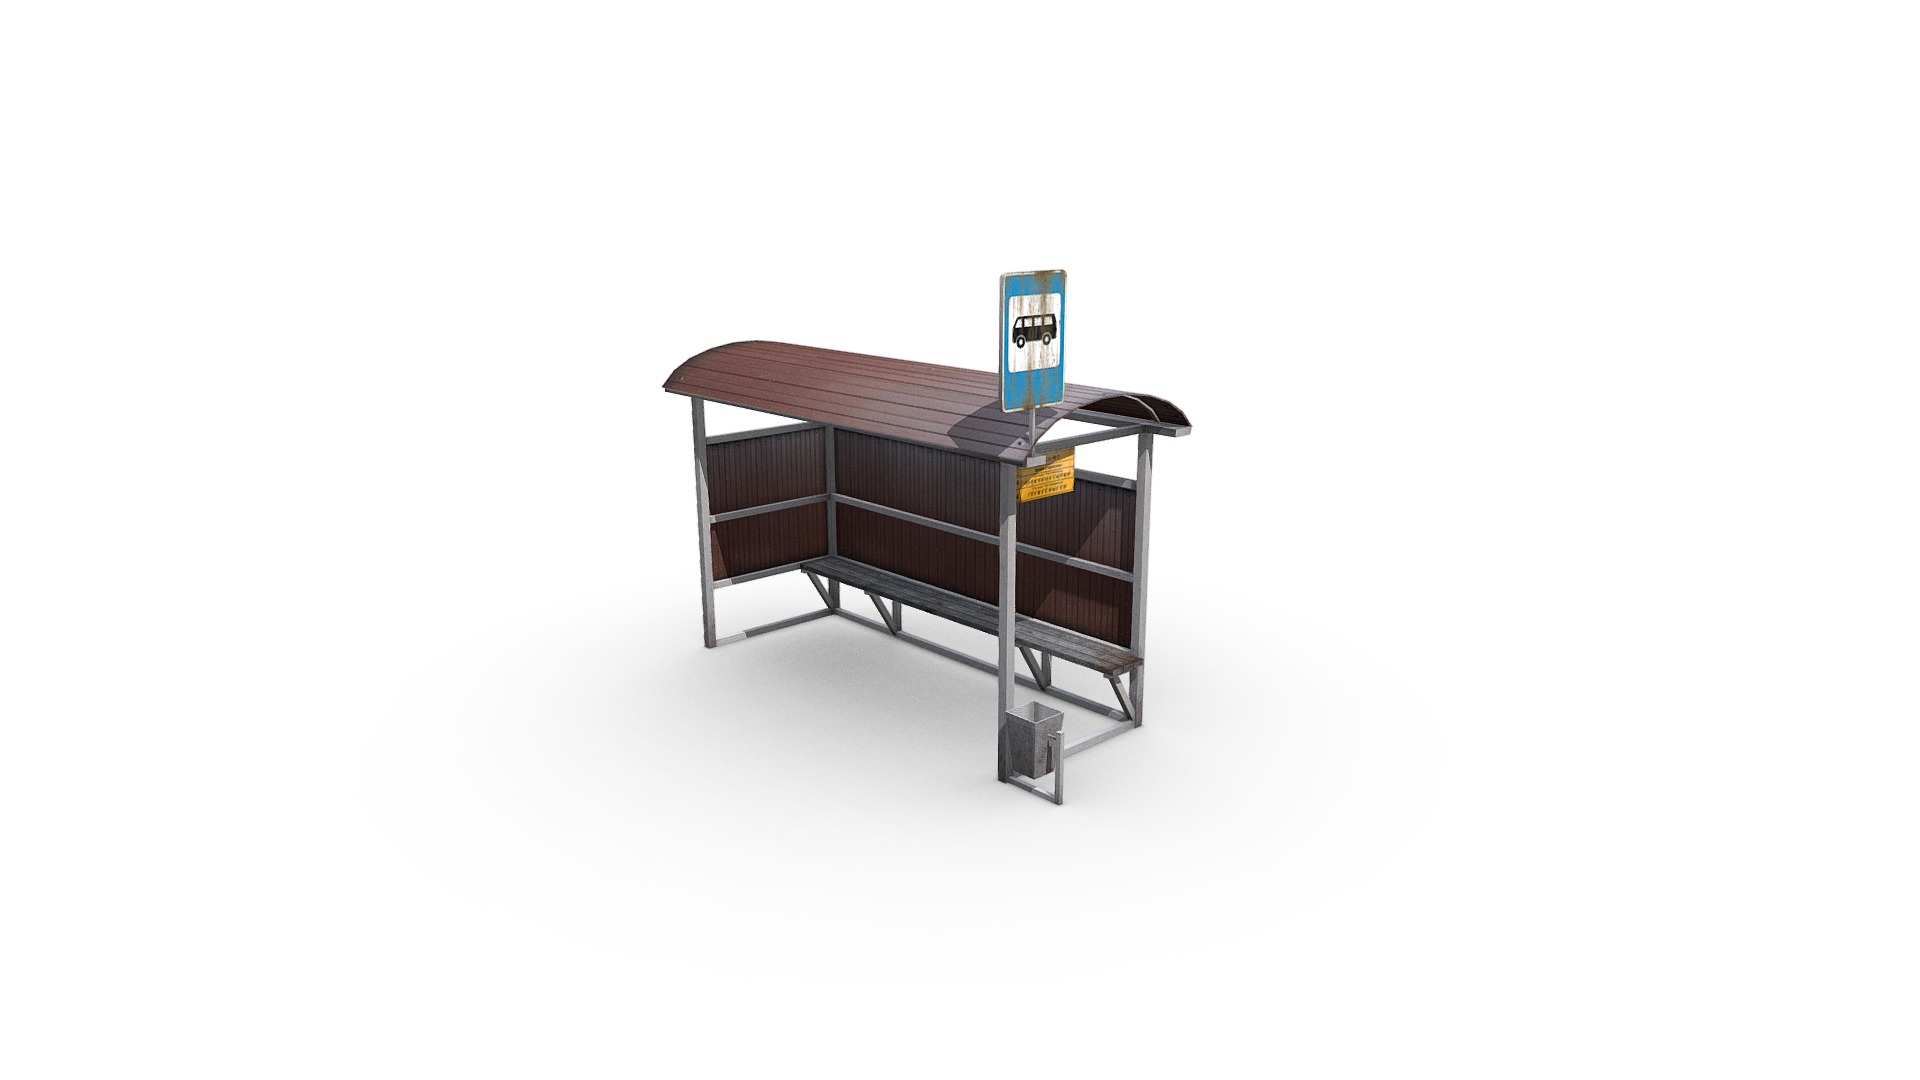 3D model Busstop - This is a 3D model of the Busstop. The 3D model is about a small wooden table.